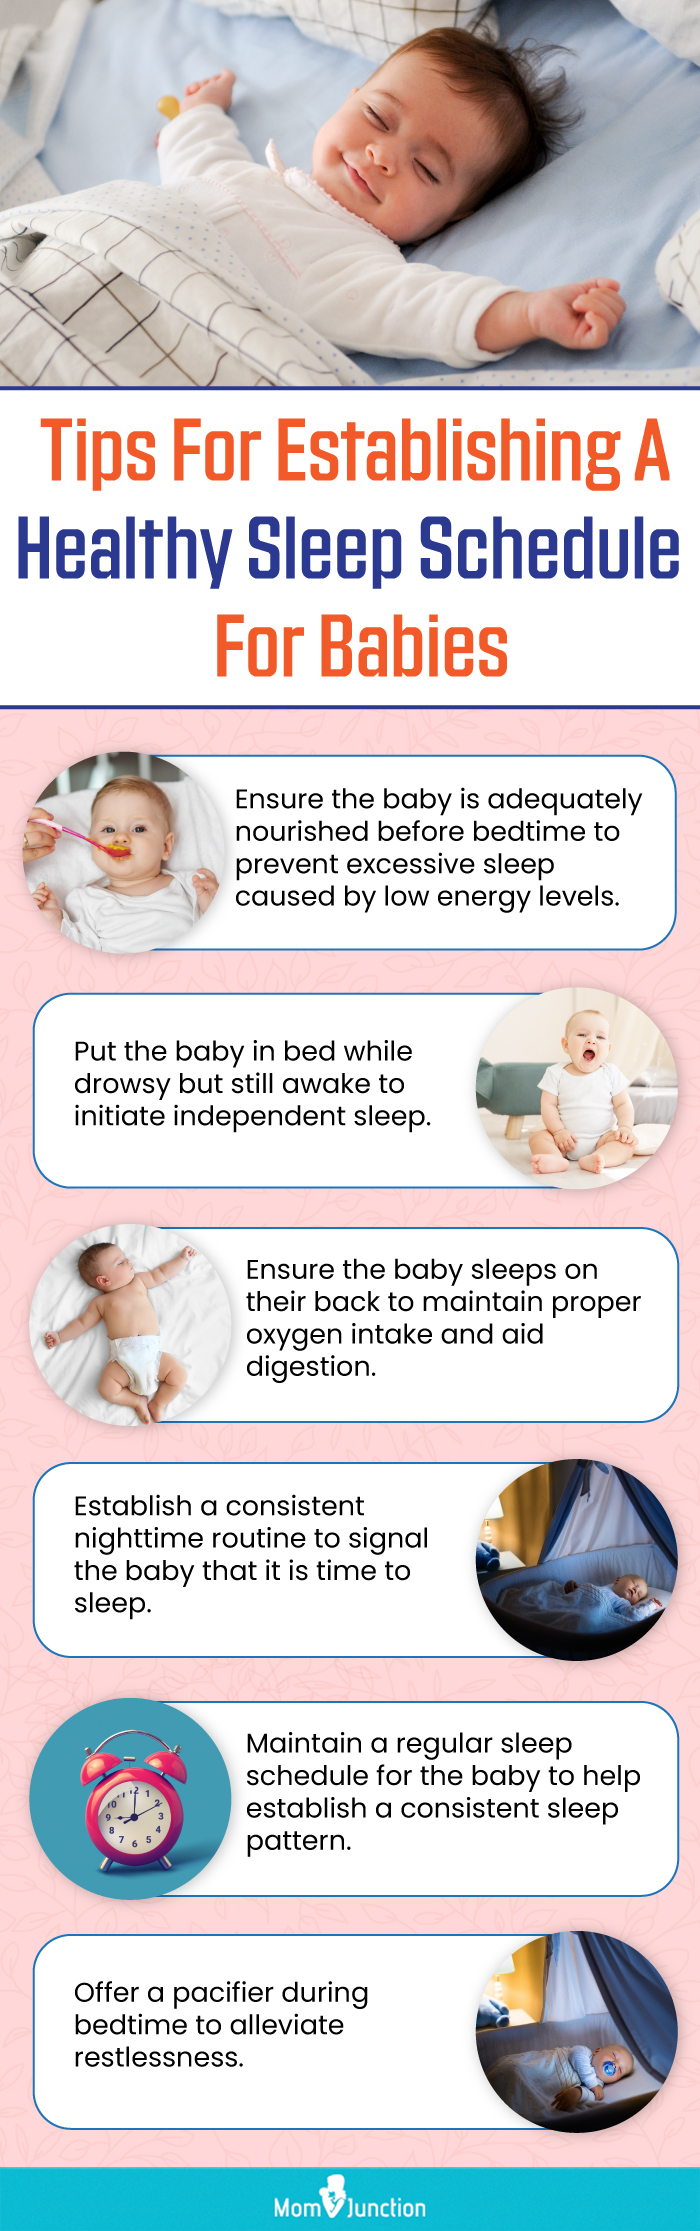 tips for establishing a healthy sleep schedule for babies (infographic)